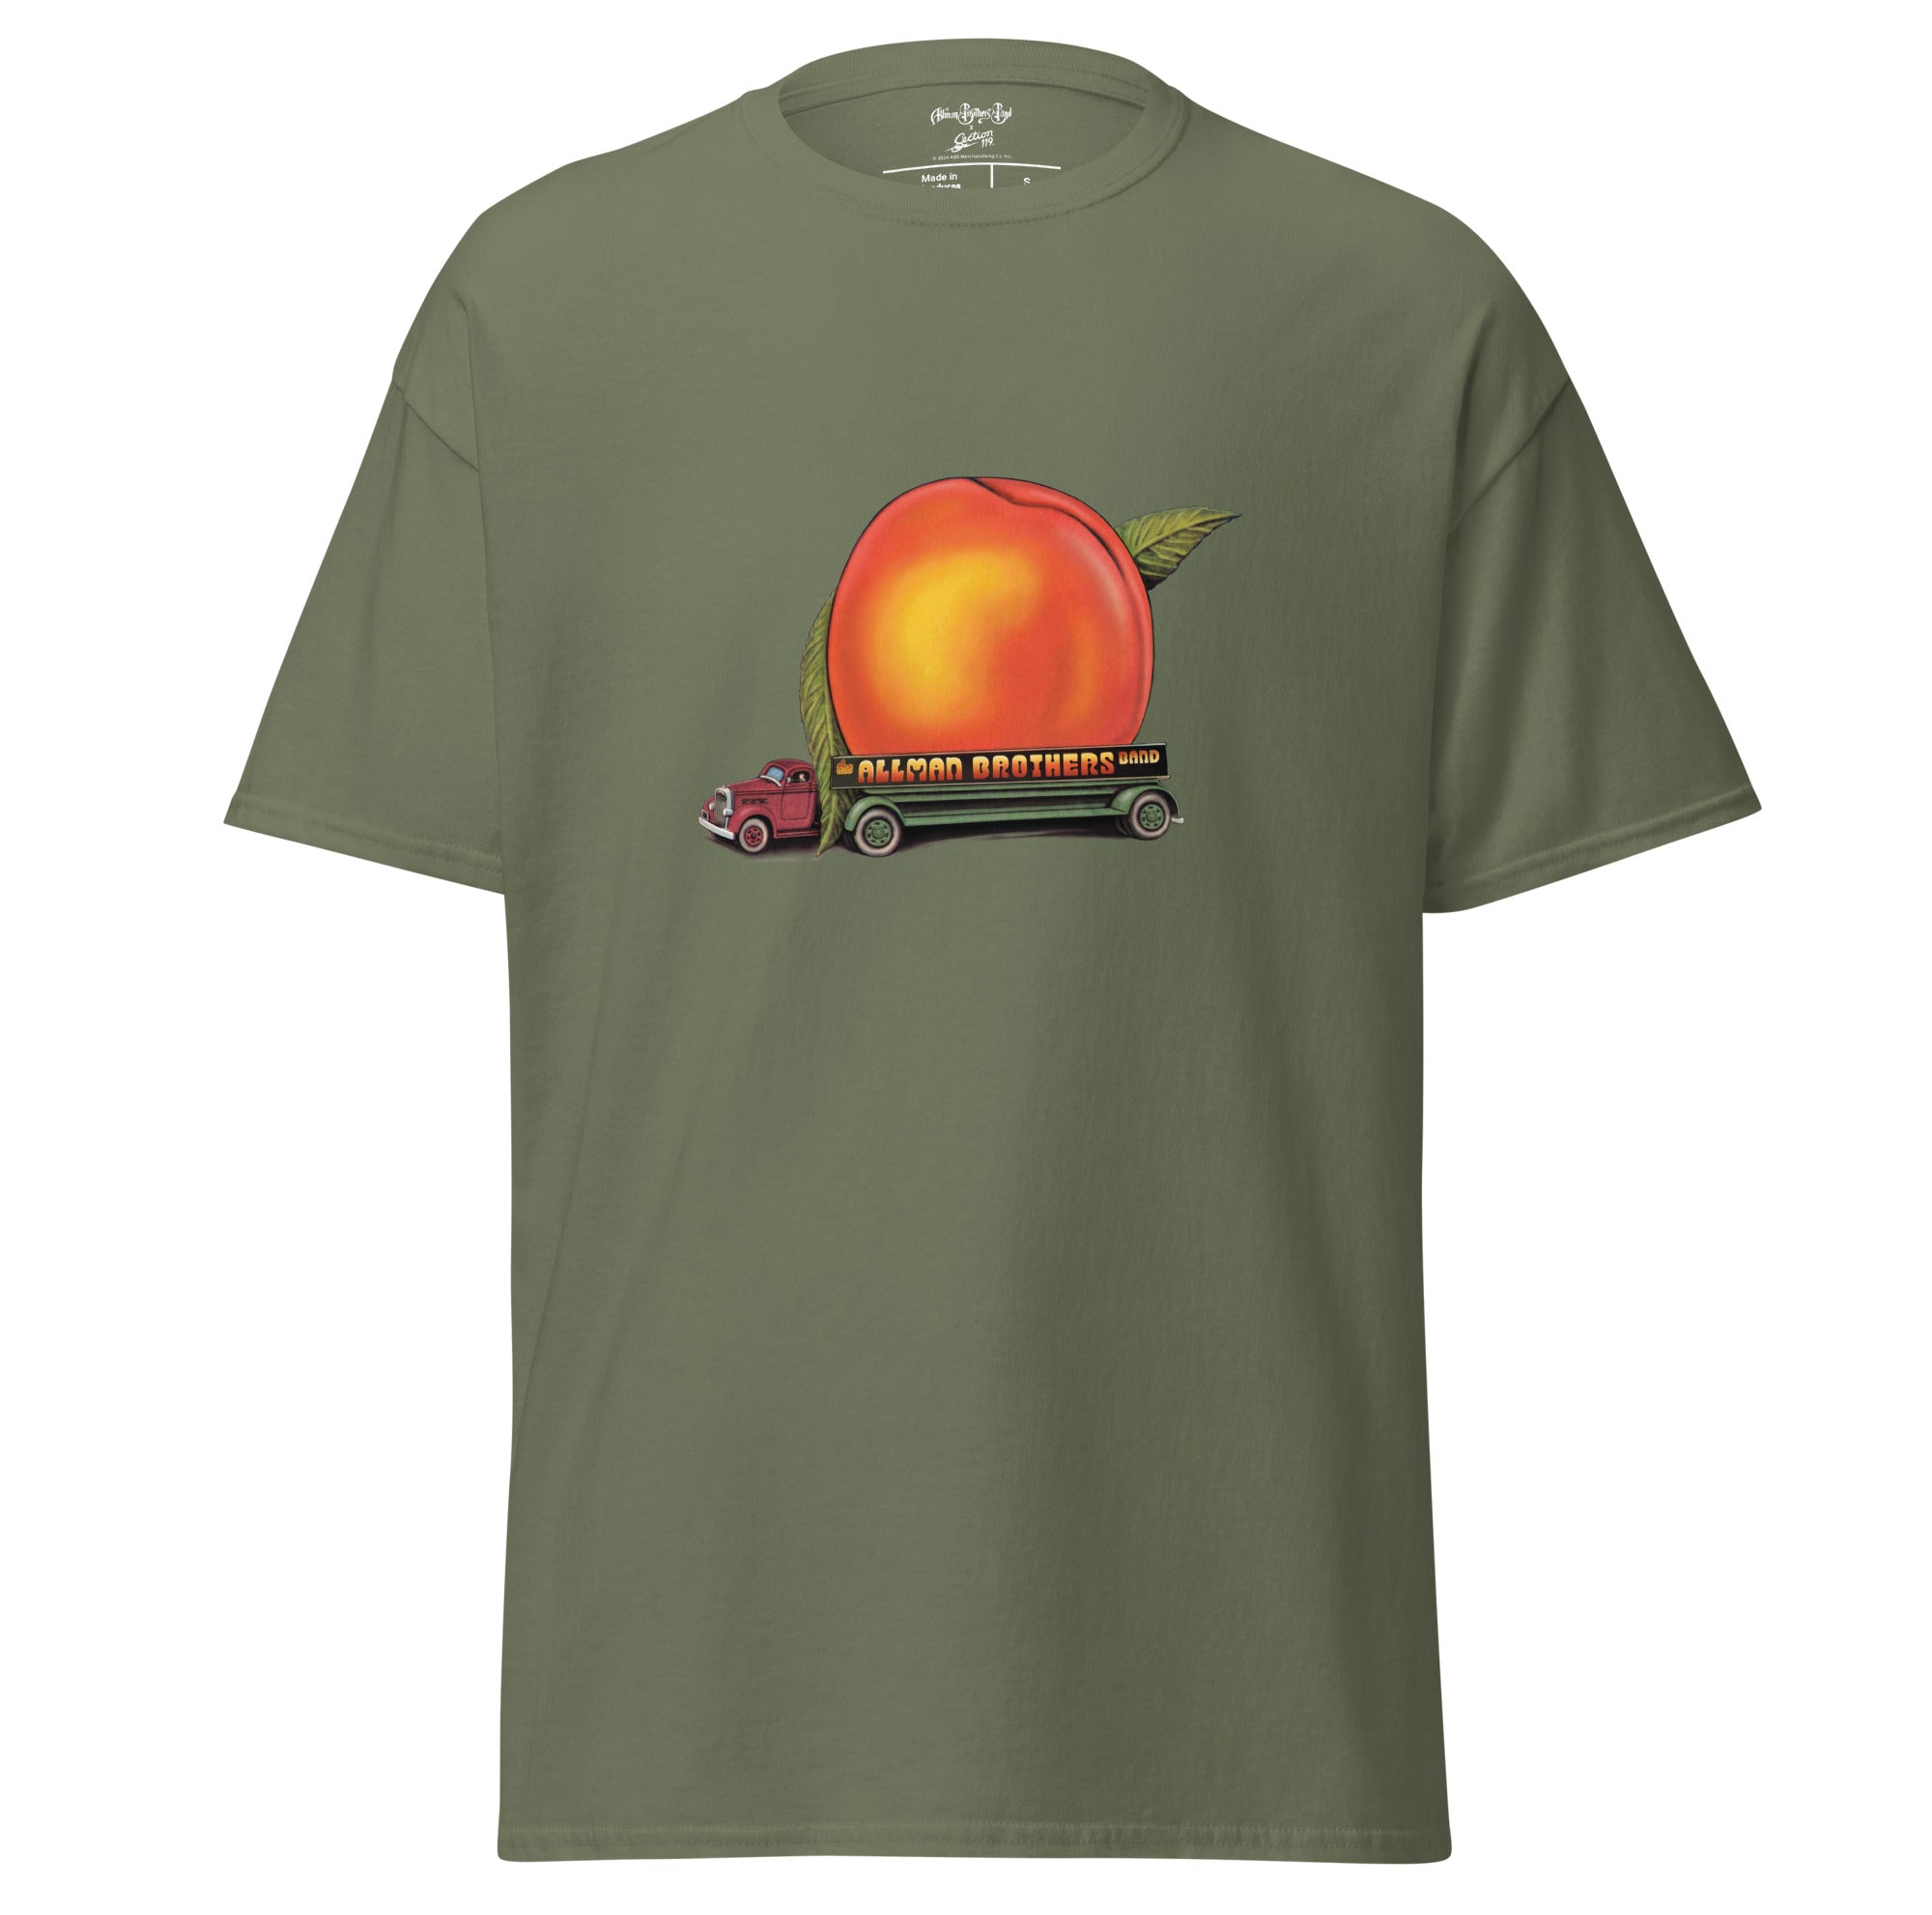 The Allman Brothers Eco T-Shirt Peach Logo Truck in Olive Green - Section 119